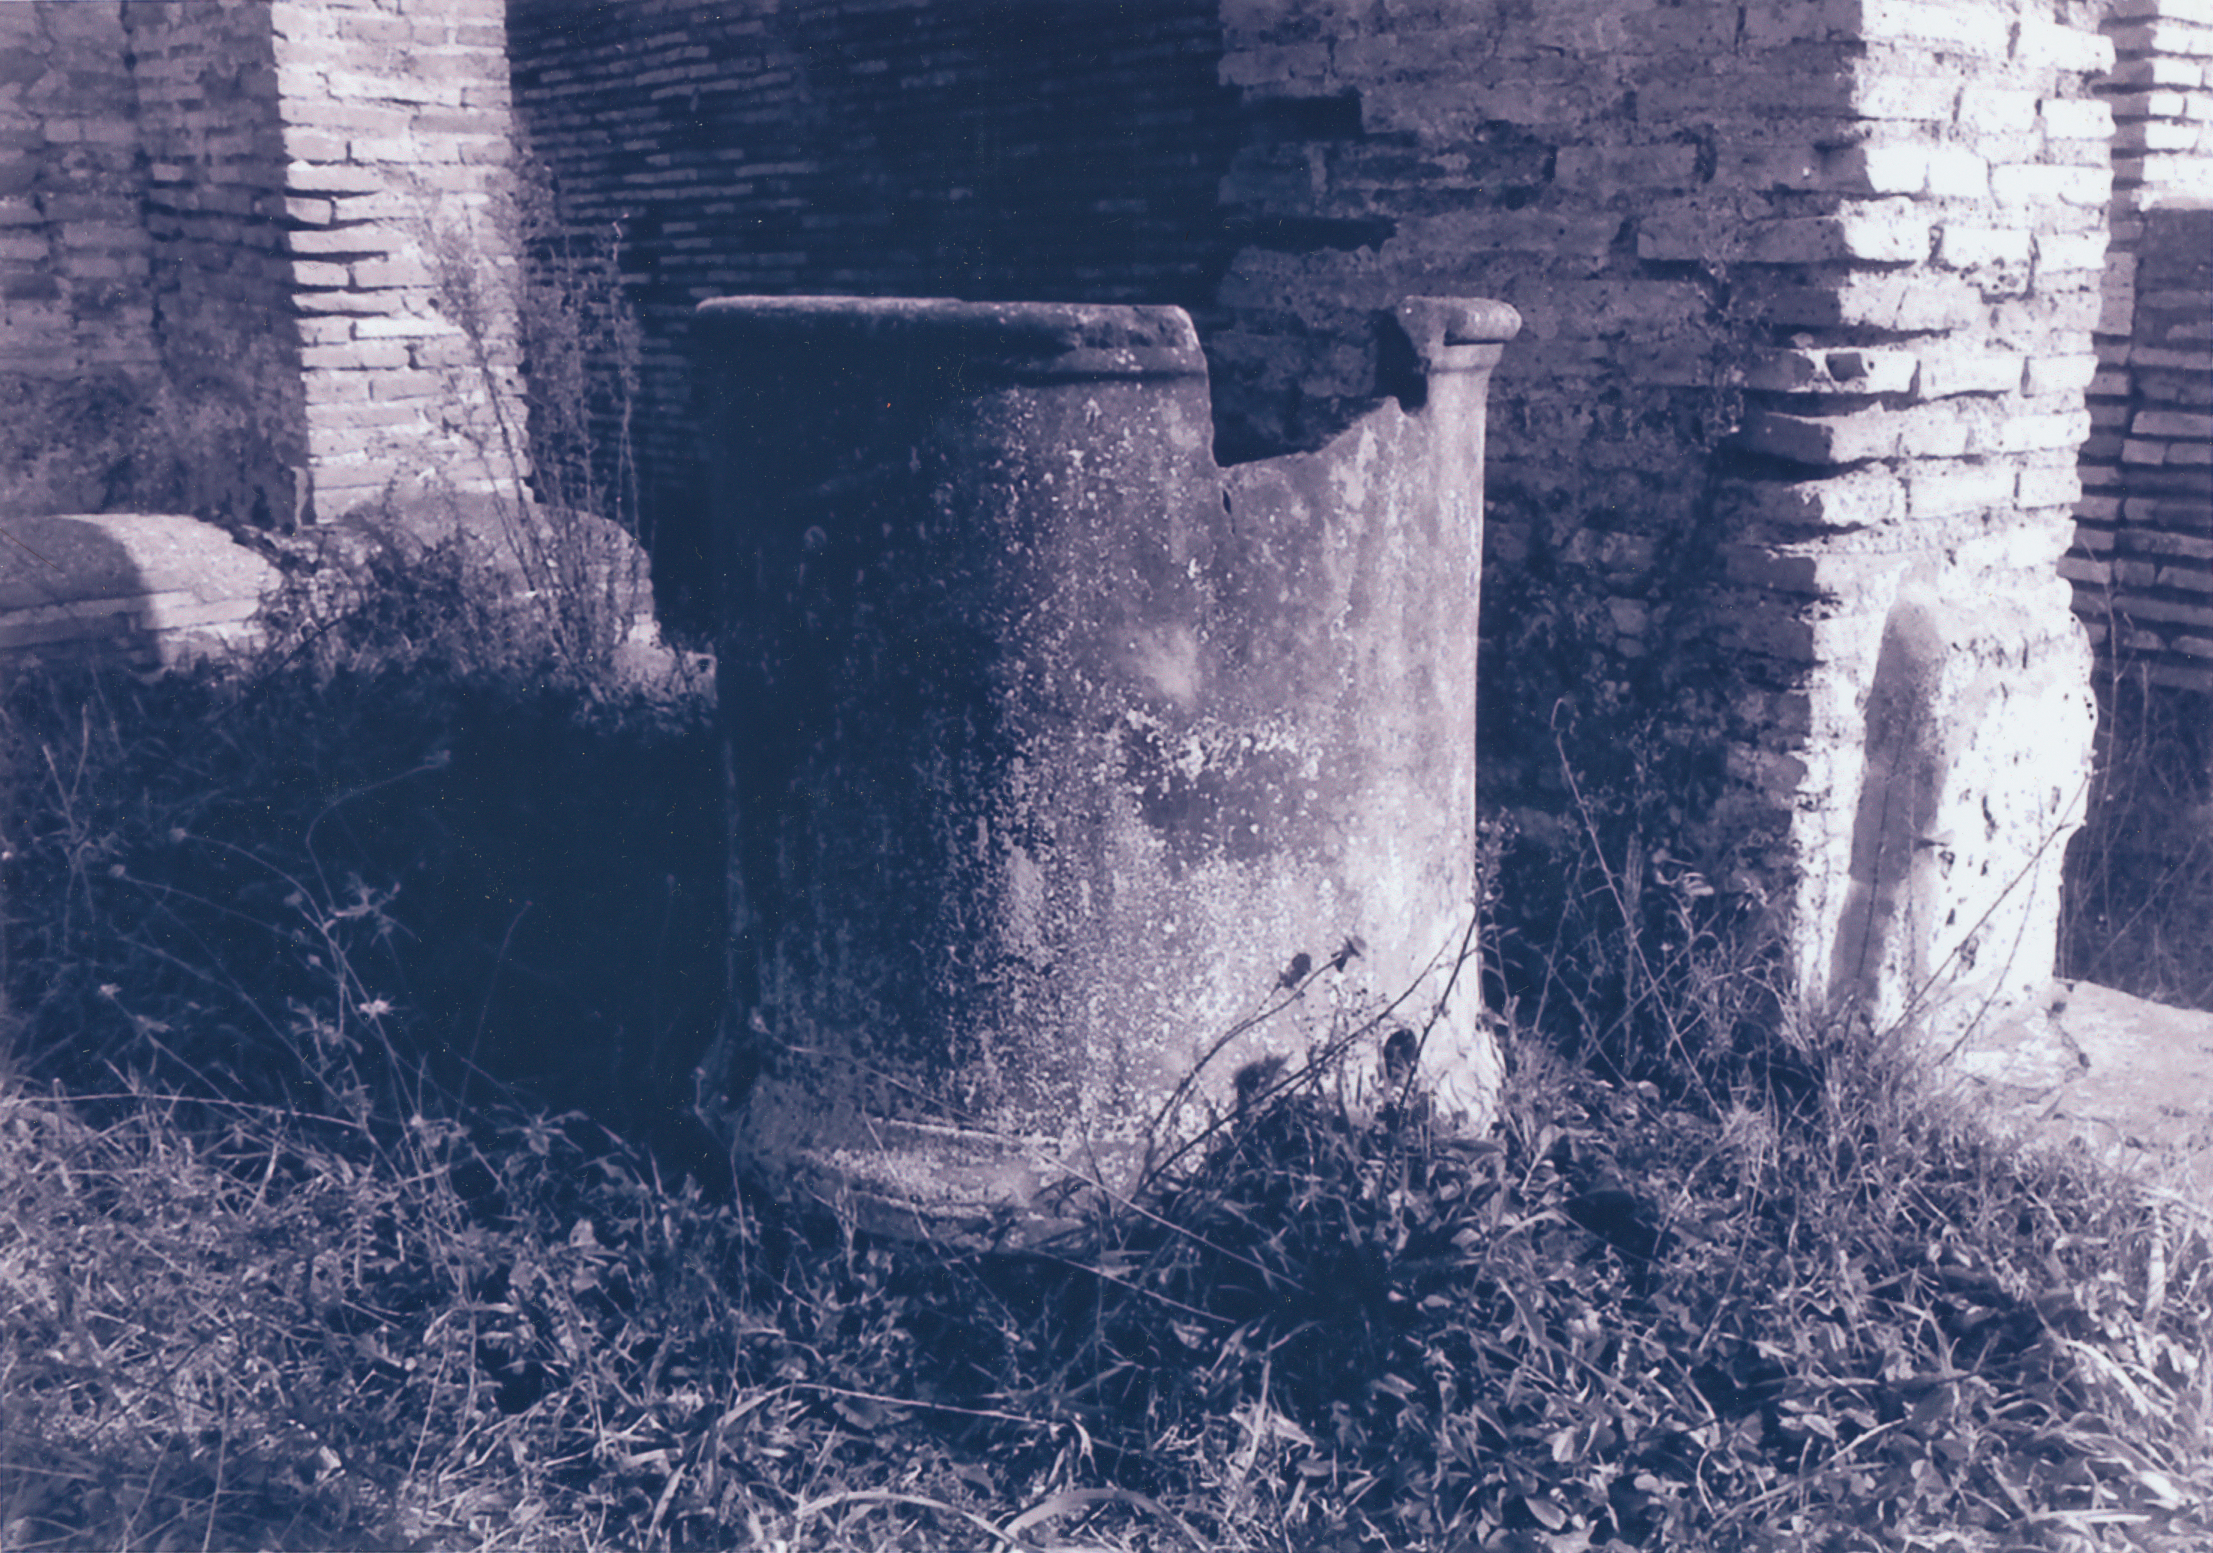 Basin shaped as a well head in the garden of the Domus Fulminata